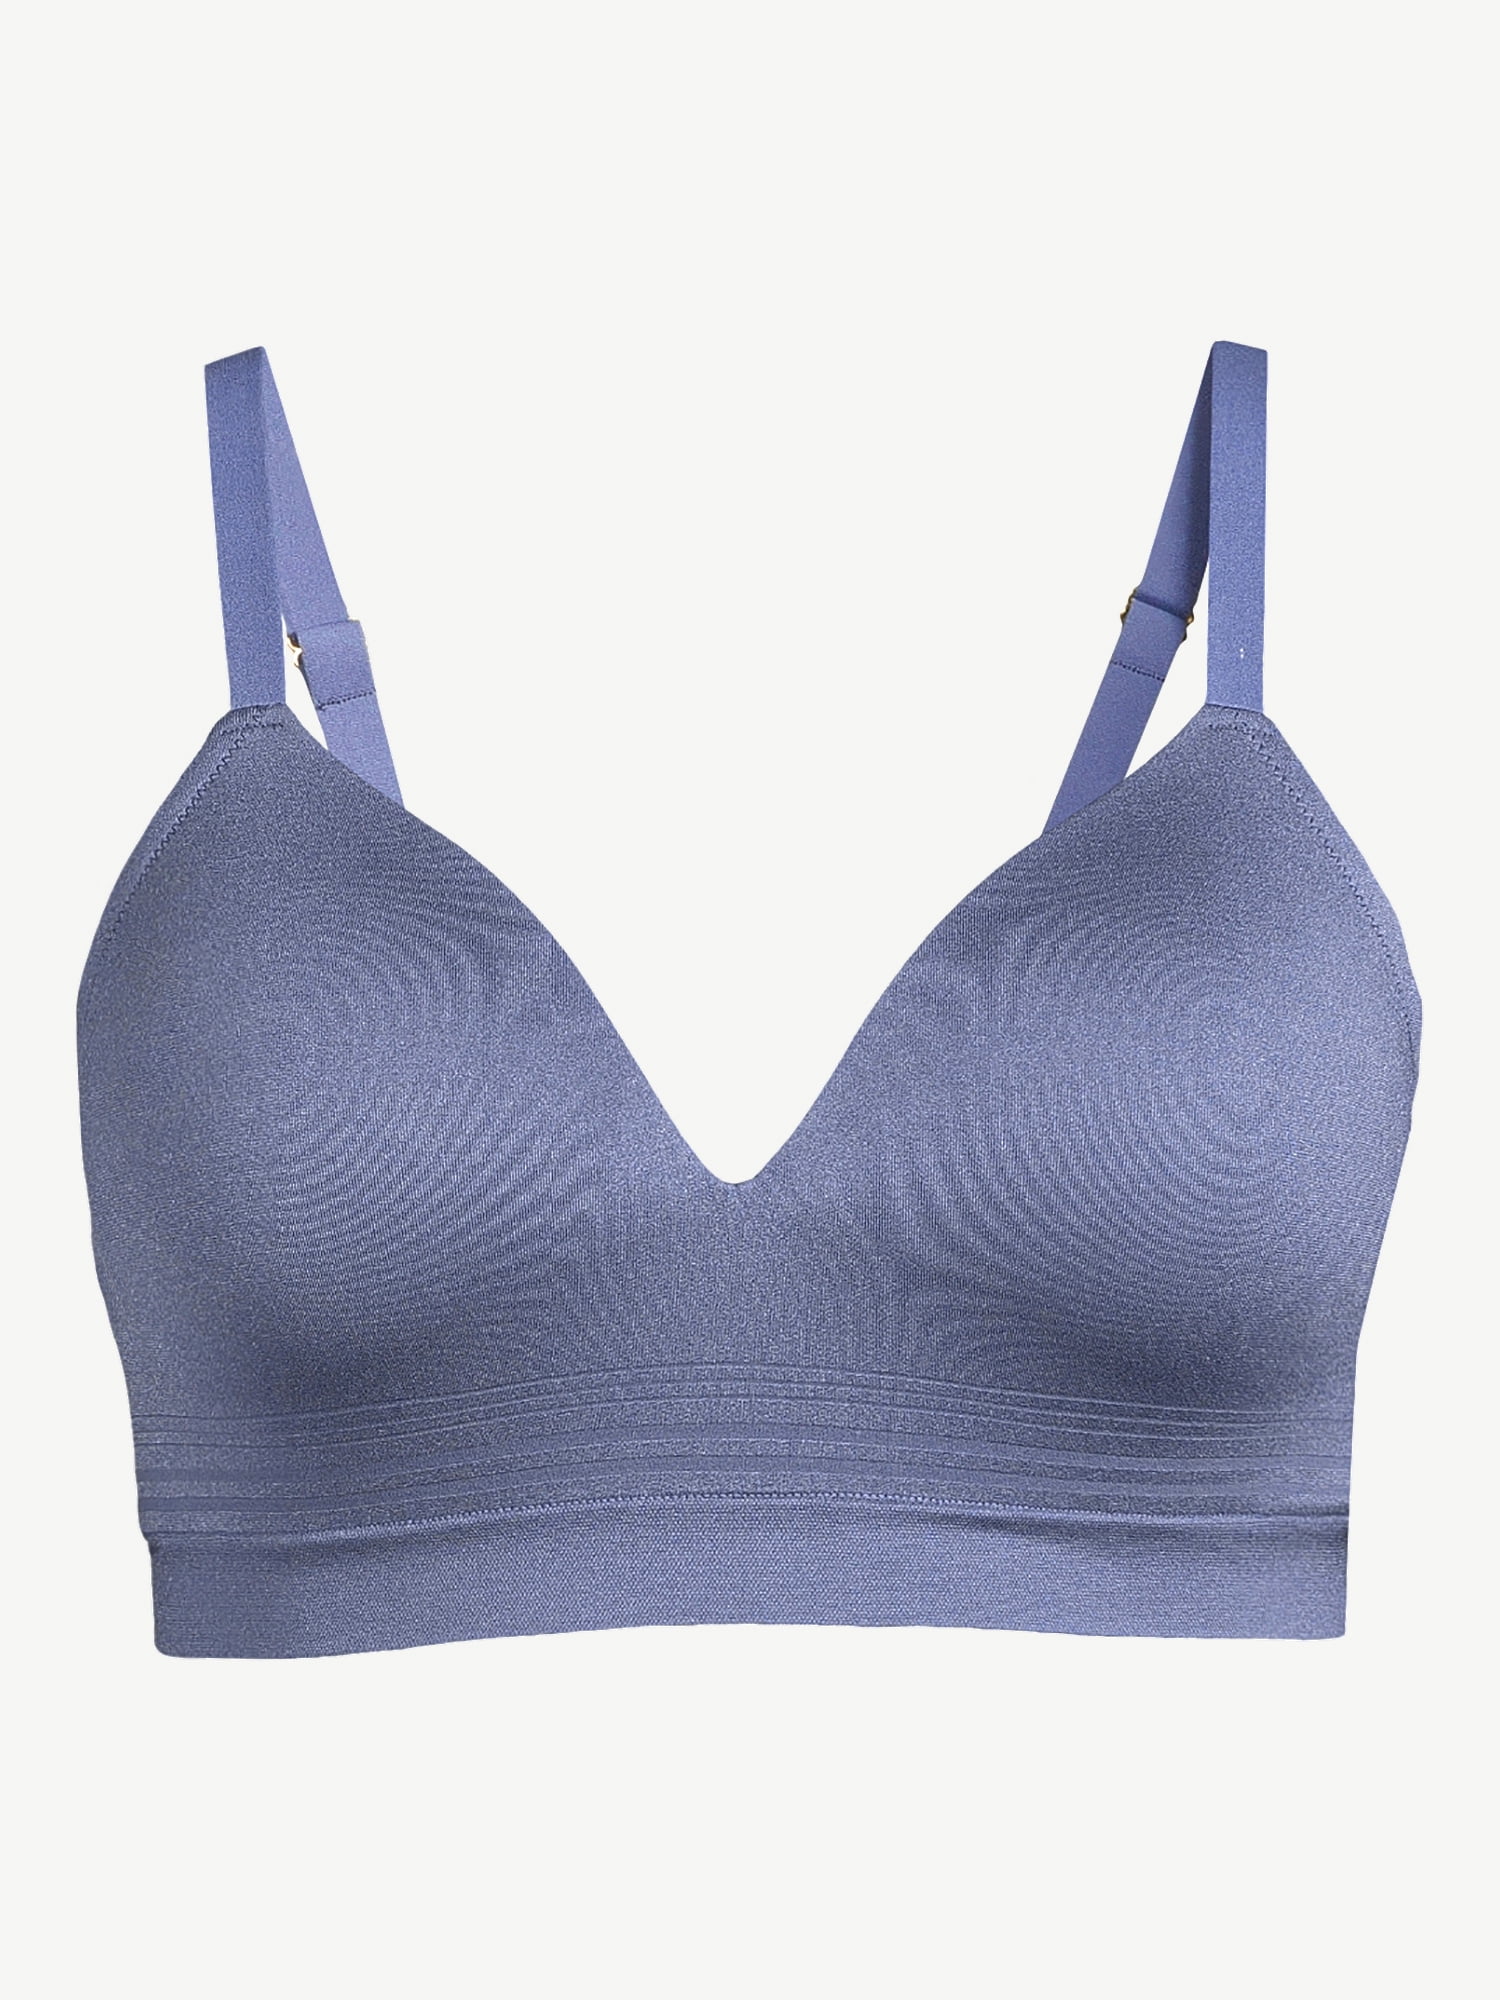 size from 32/70 to 38/85 B Cup Summer seamless boob tube top anti-light  Wireless push up bra